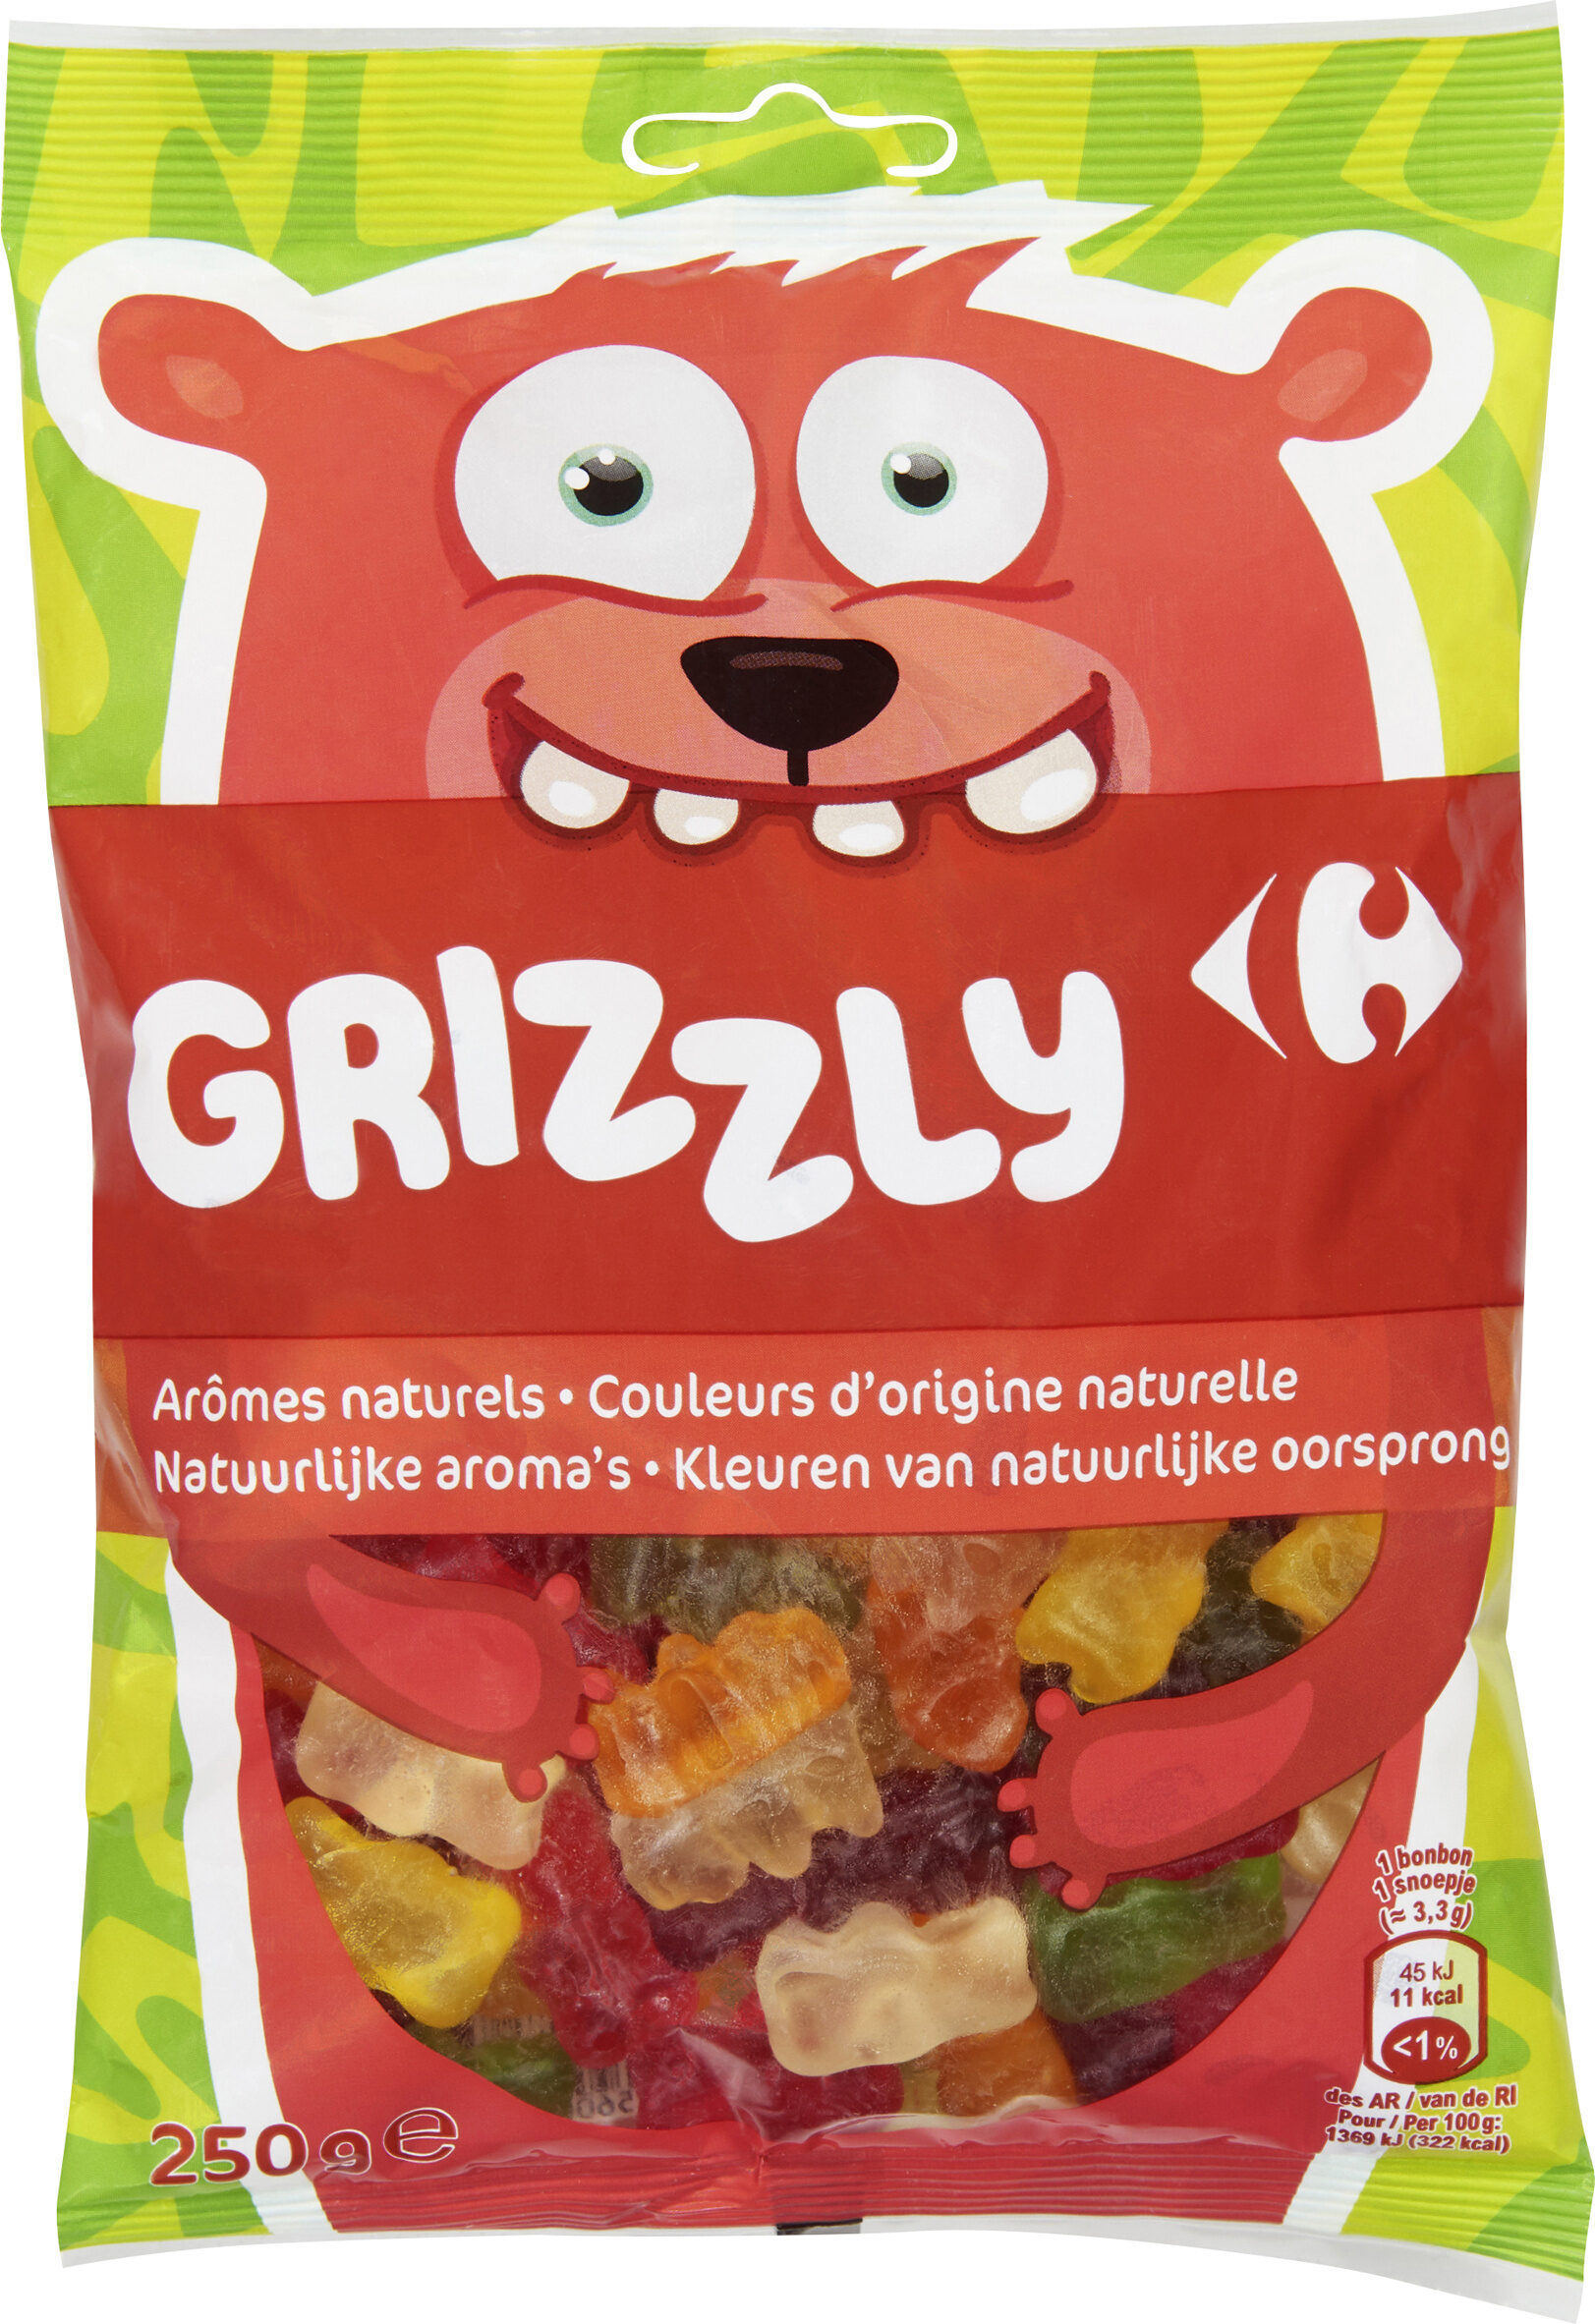 Grizzly - Producto - fr